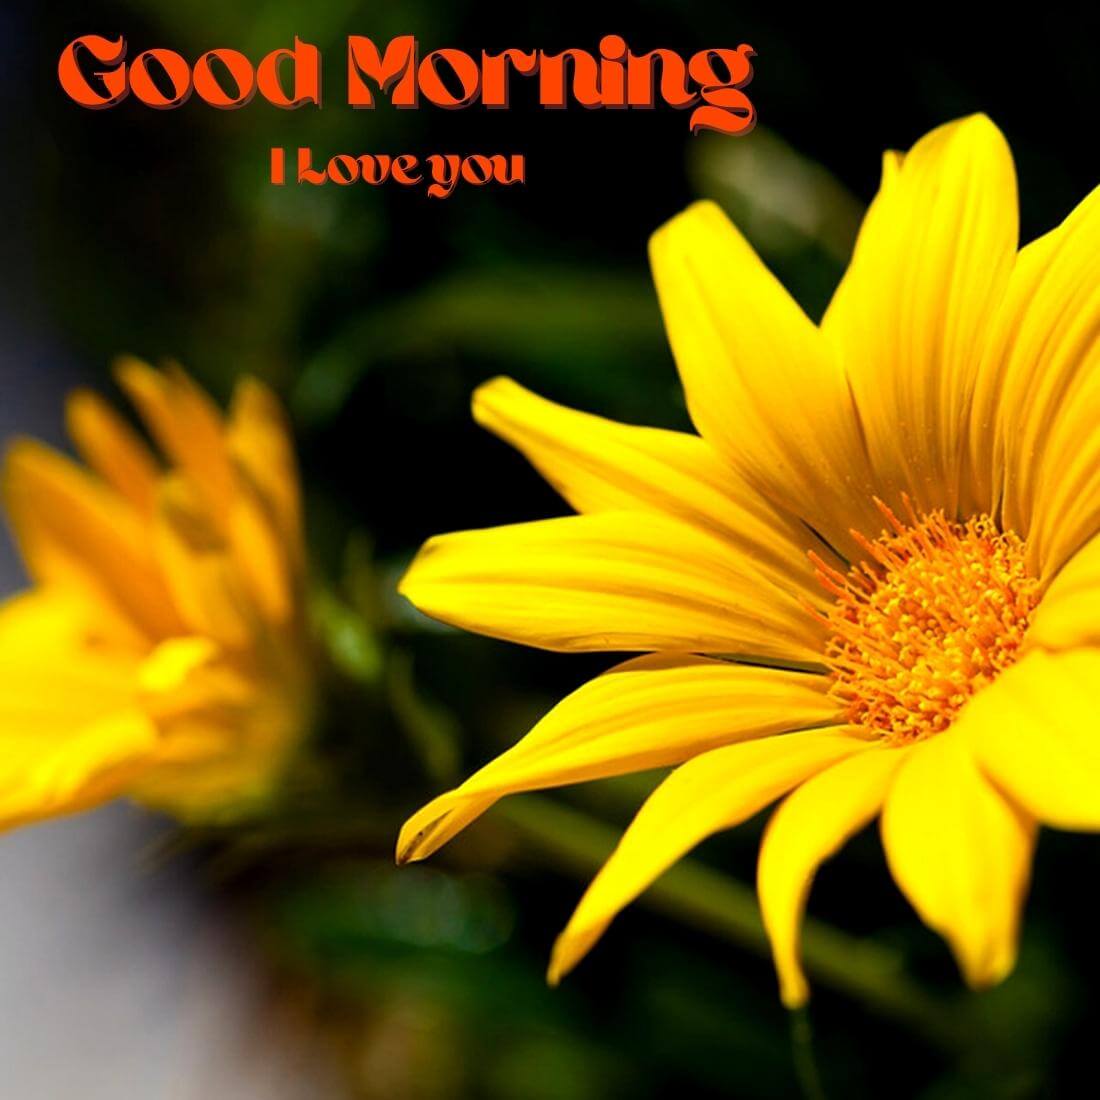 Good Morning I Love You Wallpaper With Yellow Flower